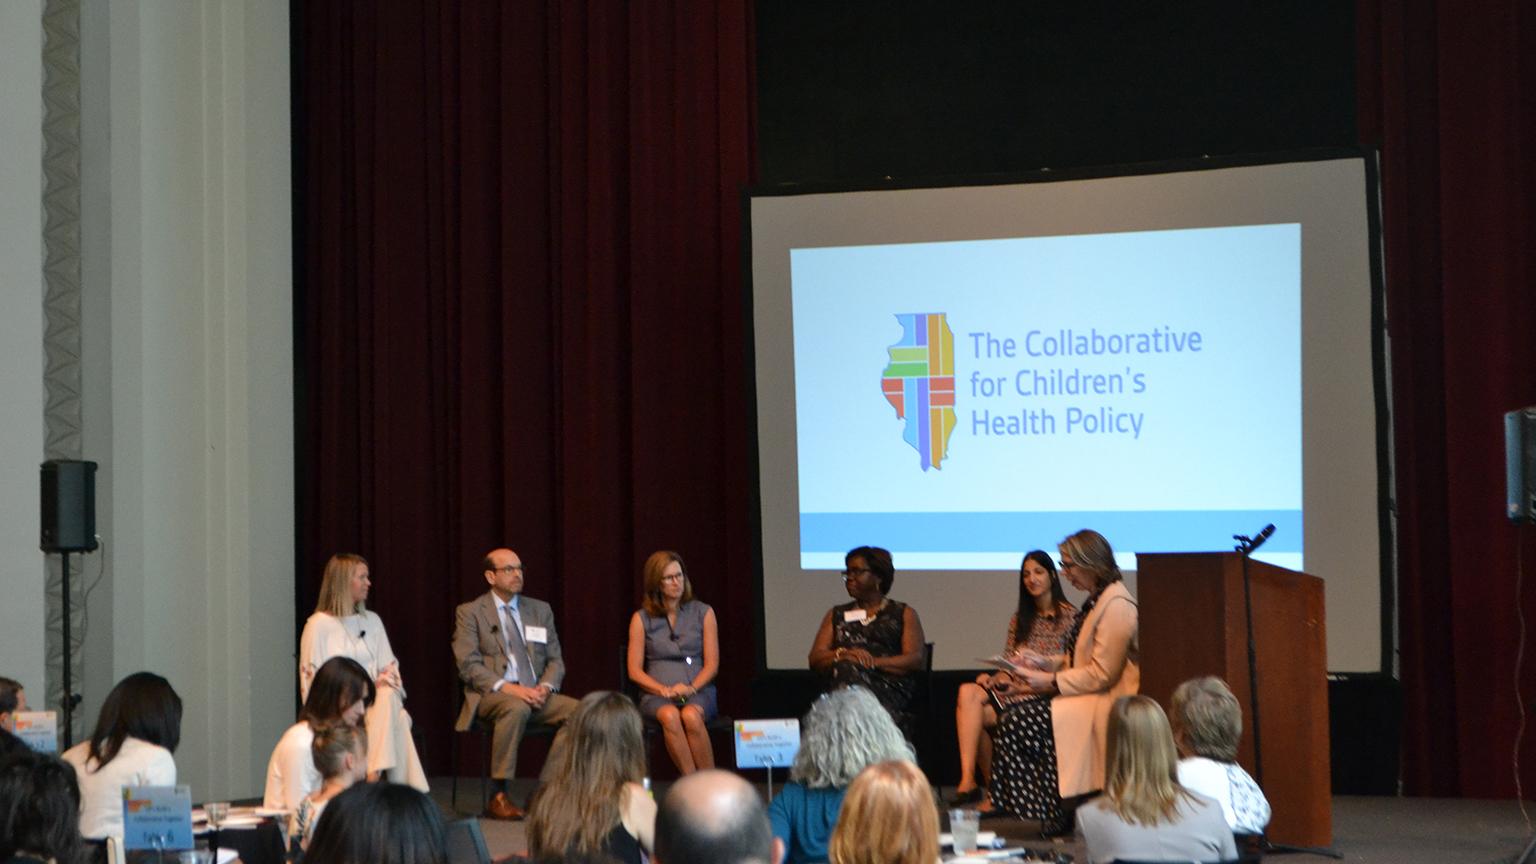 Panelists discuss inequity in child health at Wednesday’s launch of the Collaborative for Children’s Health Policy. (Kristen Thometz / Chicago Tonight)